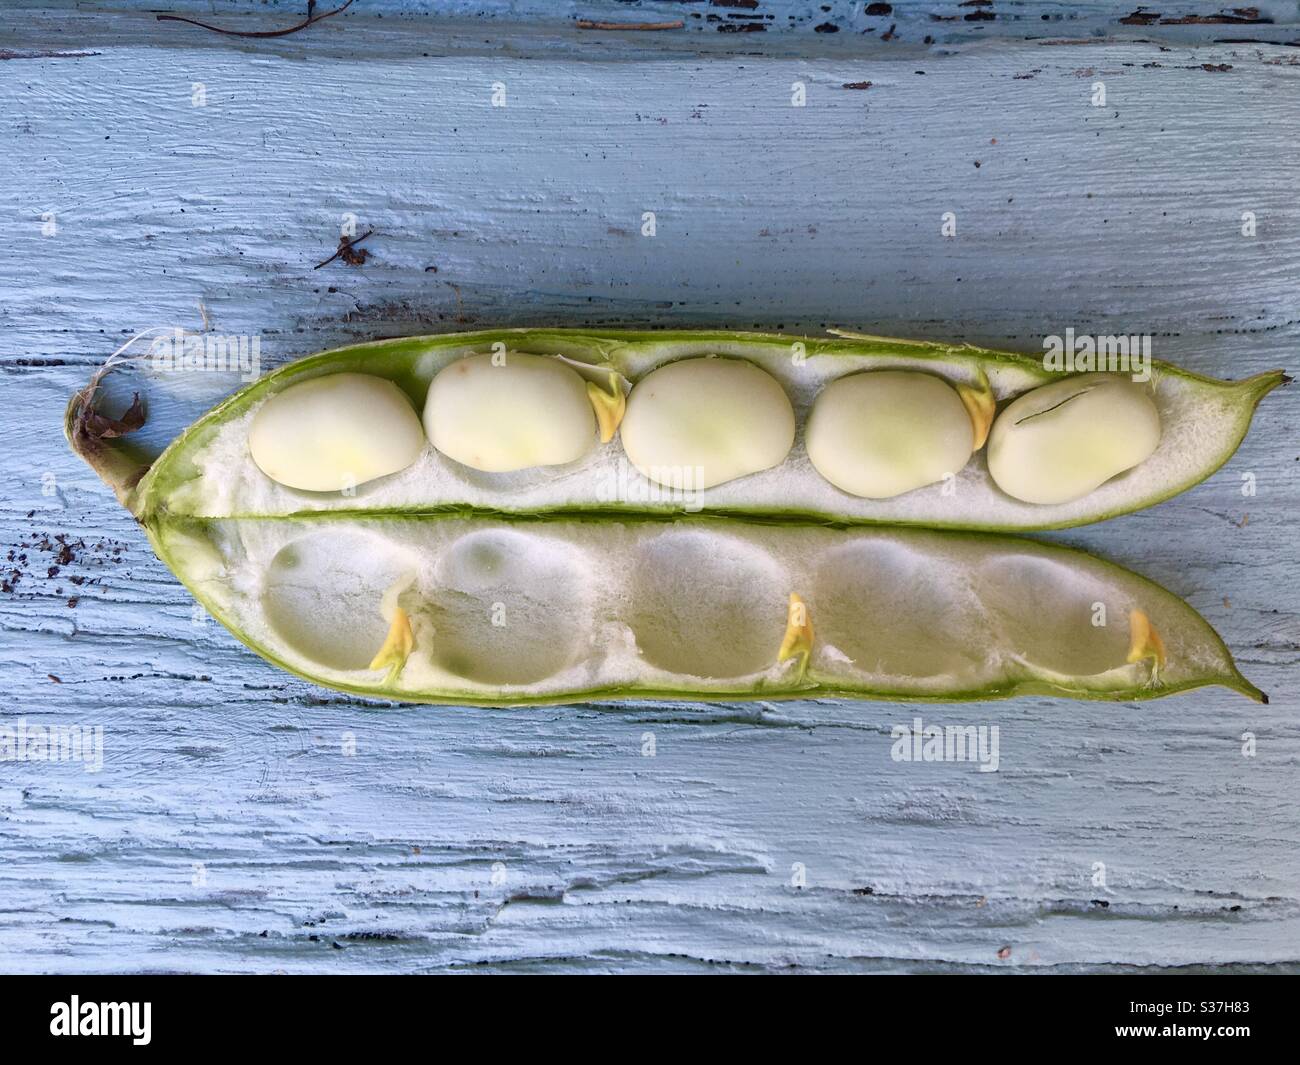 Broad beans in pod Stock Photo